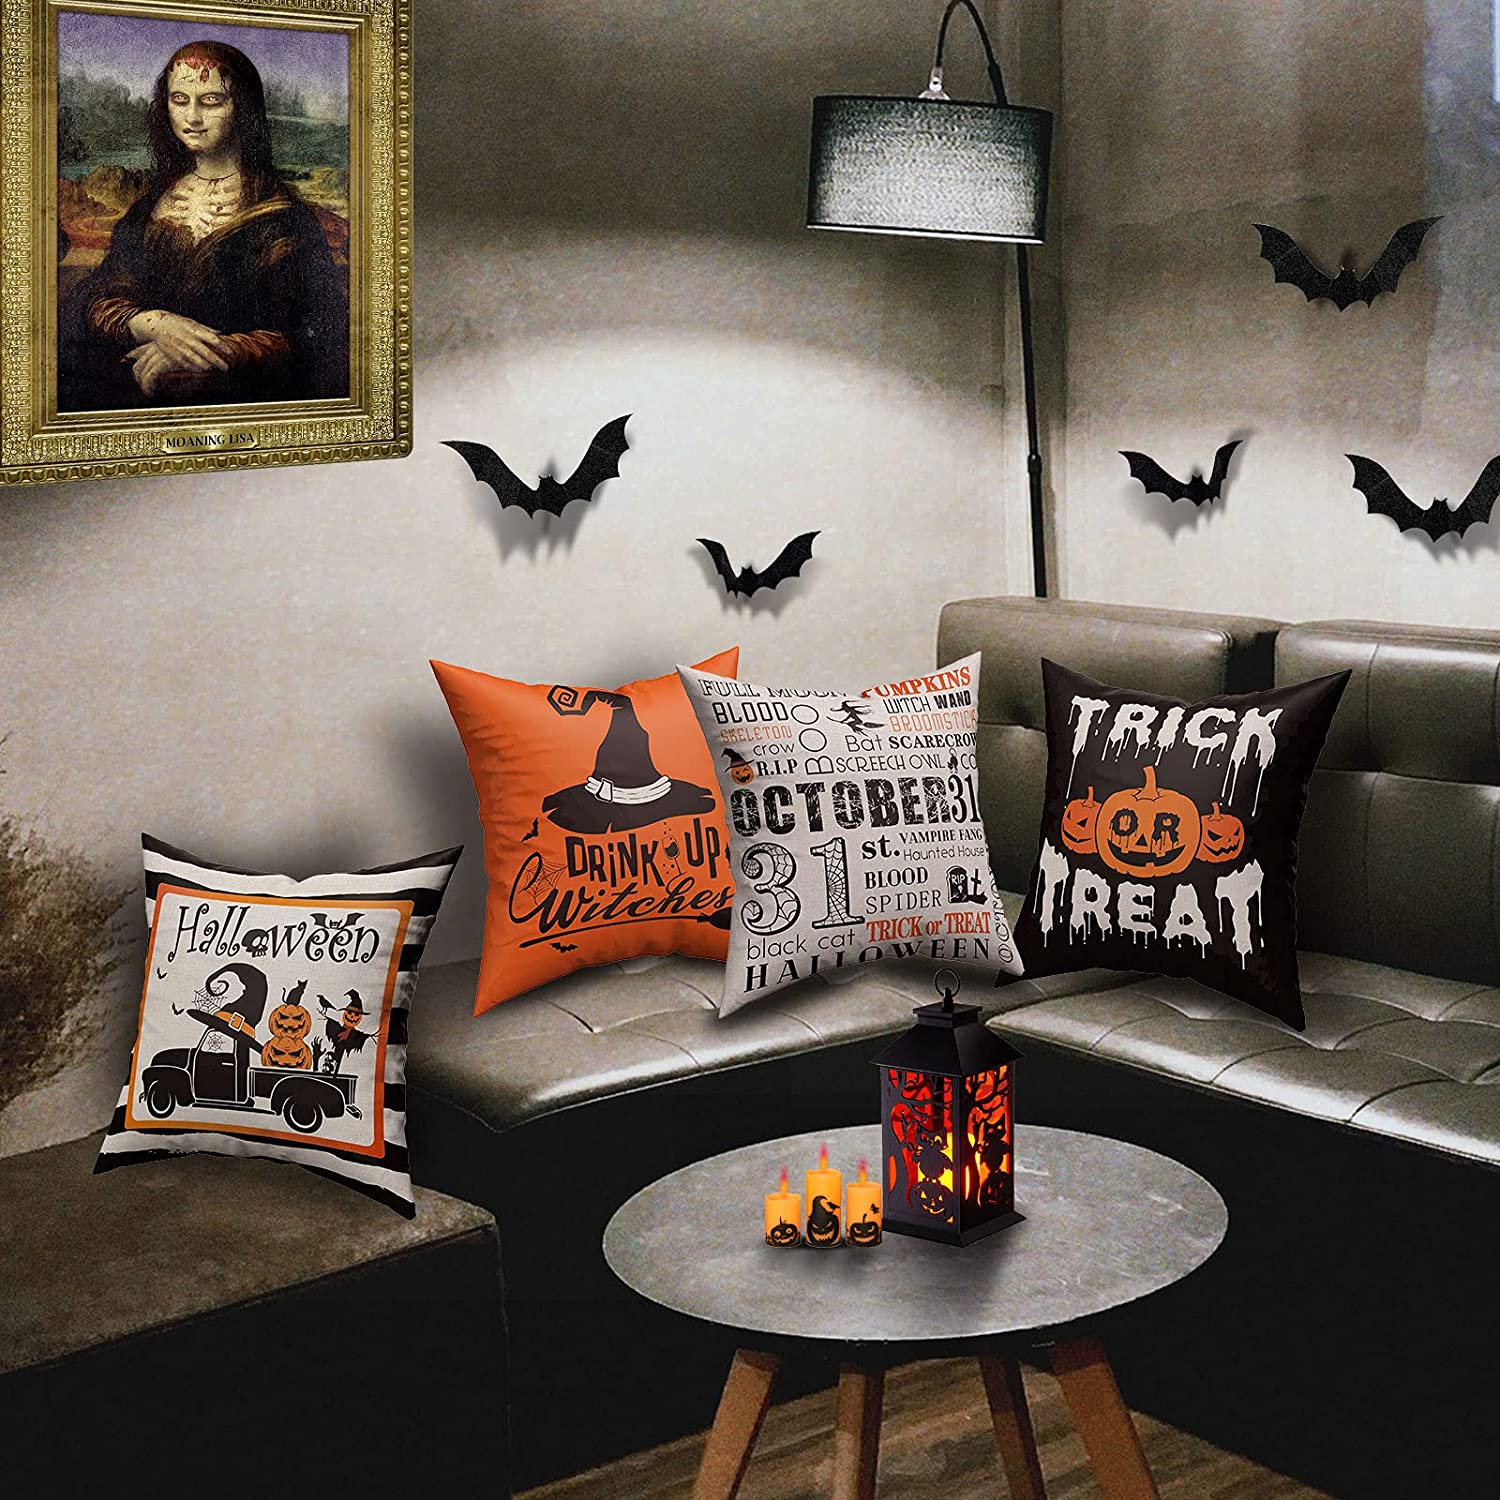 Set of 4 Spooky Halloween Pillow Cover 18 x 18 with 4 Bonus Coasters (Witch Hat, Truck)